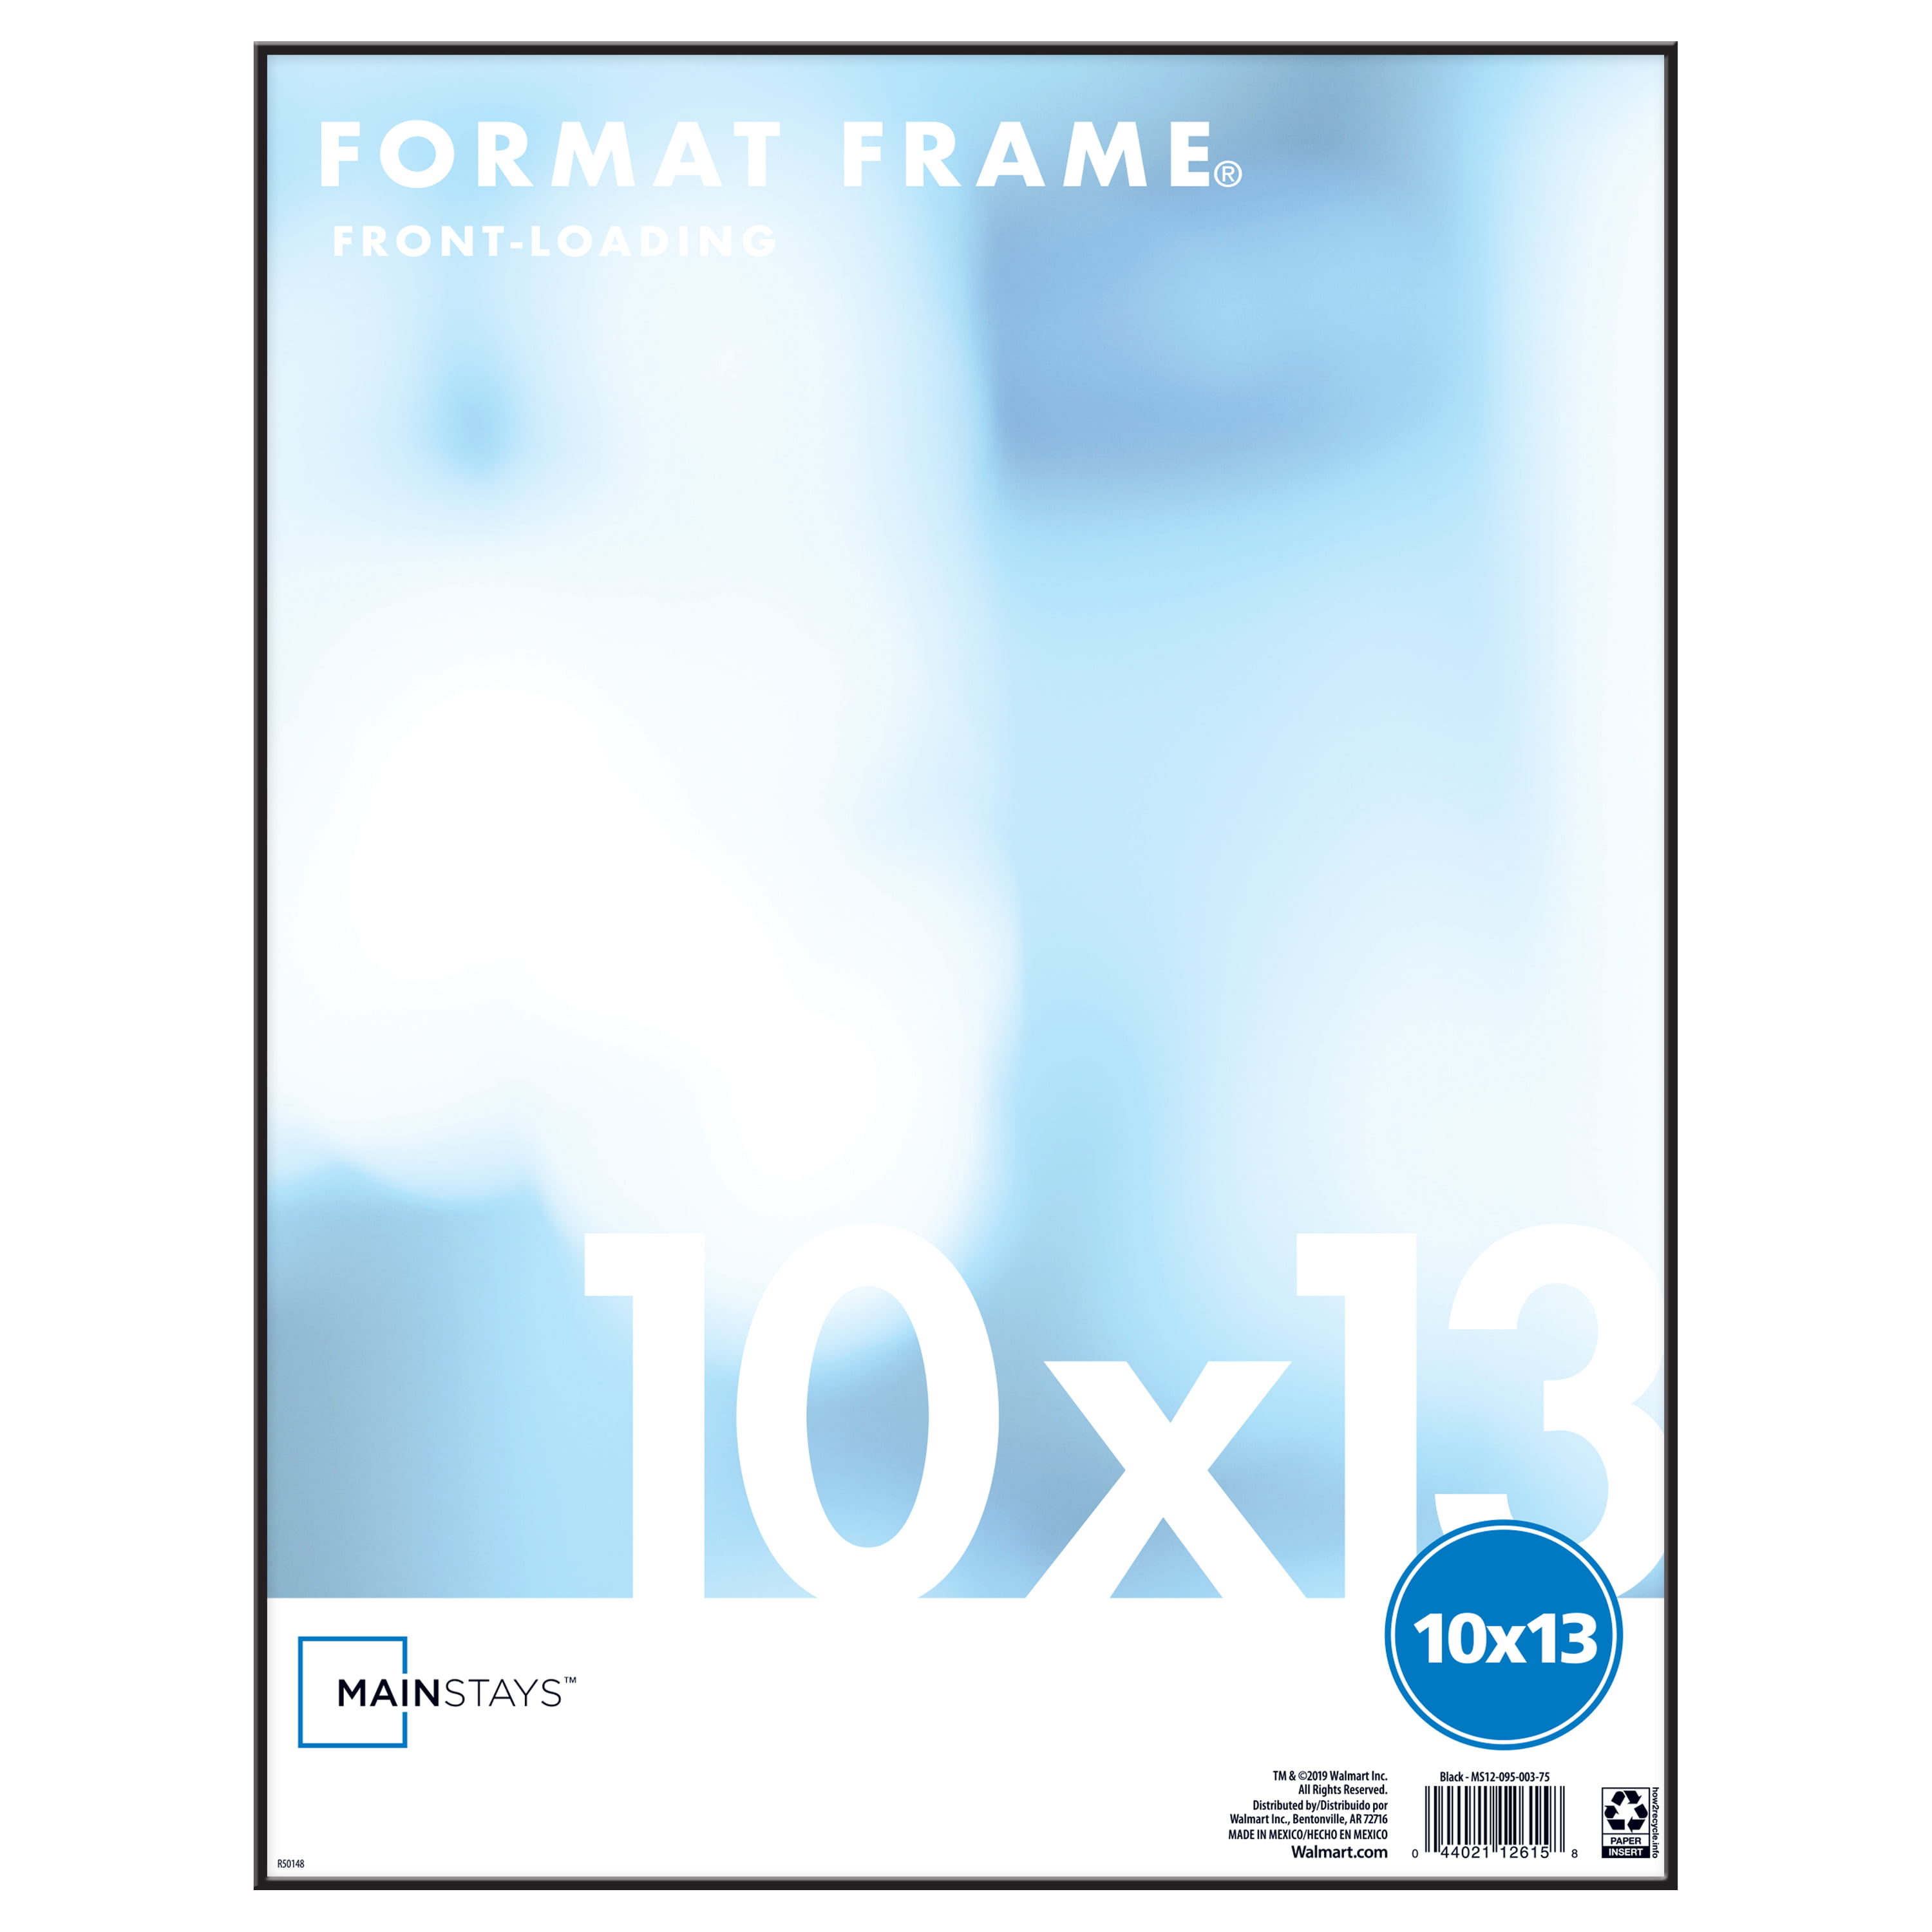 Details about   Mainstays 8x10 Linear Frame Black W